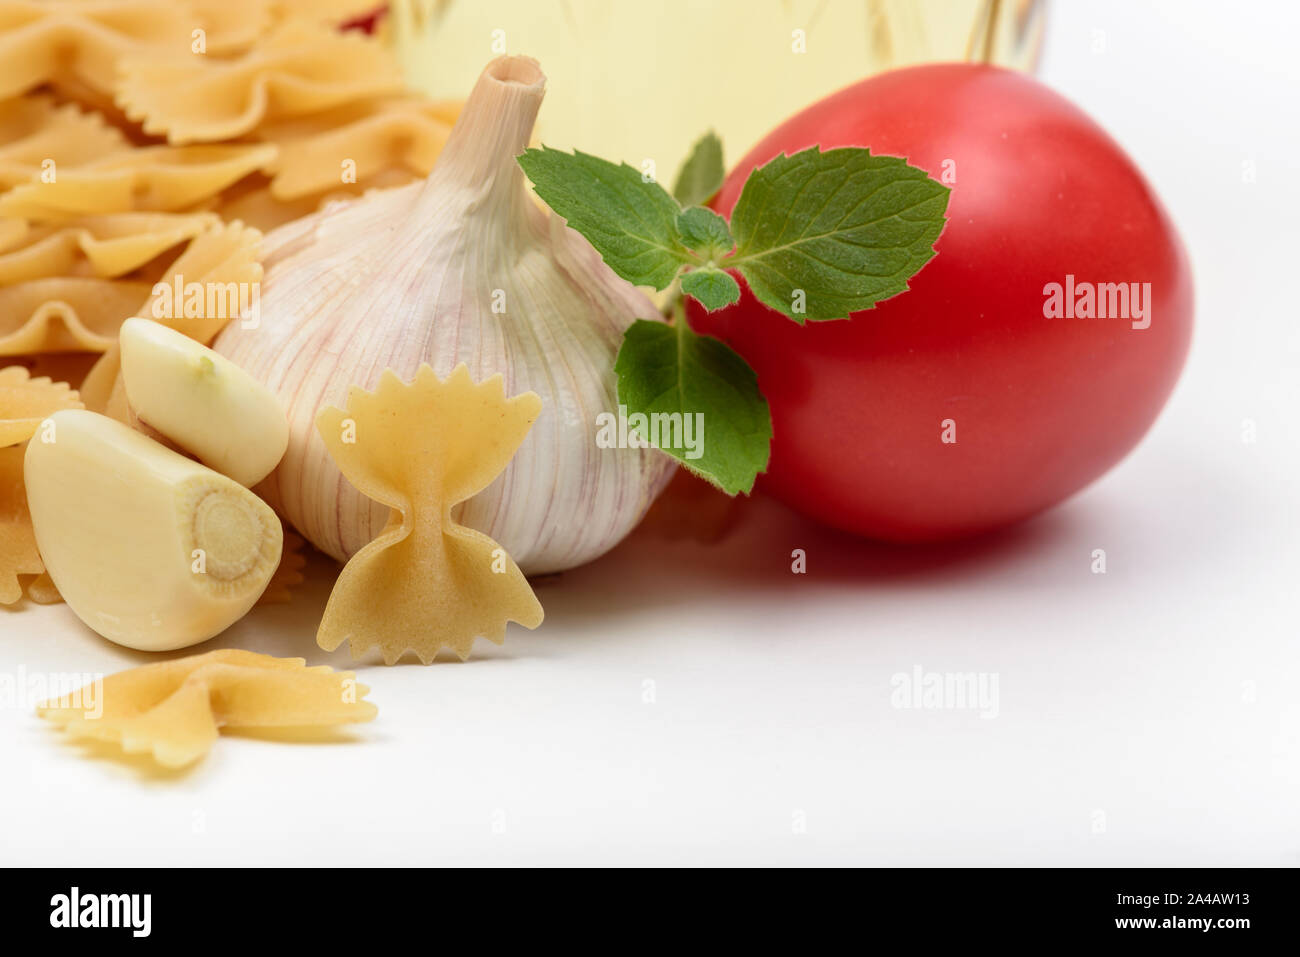 Pasta cooking ingredients. Italian farfalle with vegetables, oil and herbs. Stock Photo